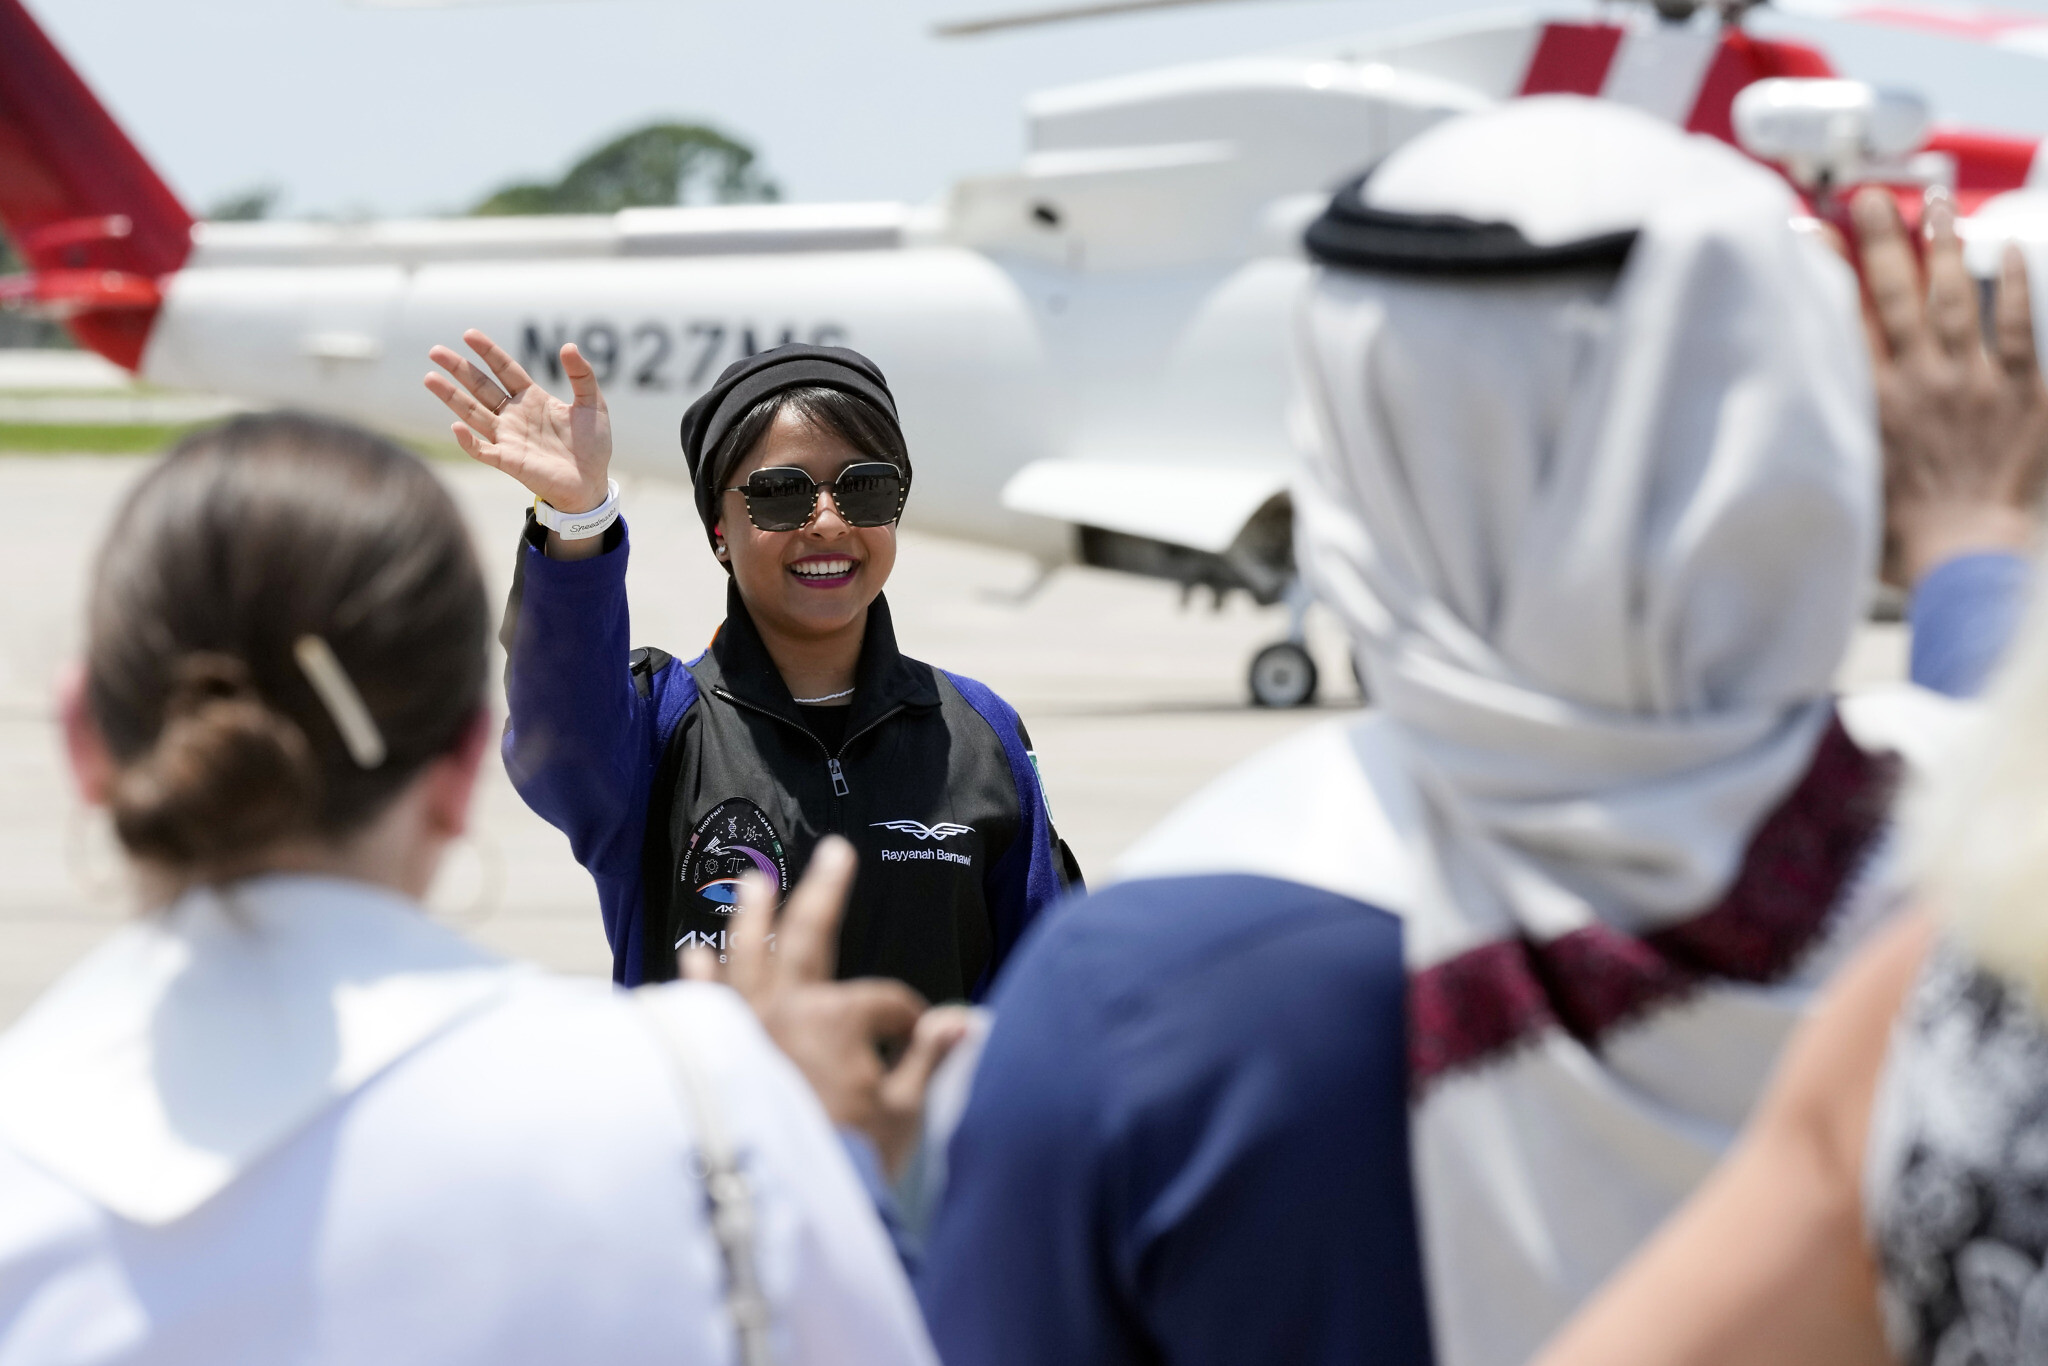 Saudi Arabia's first female astronaut blasts off for space station | The Times of Israel